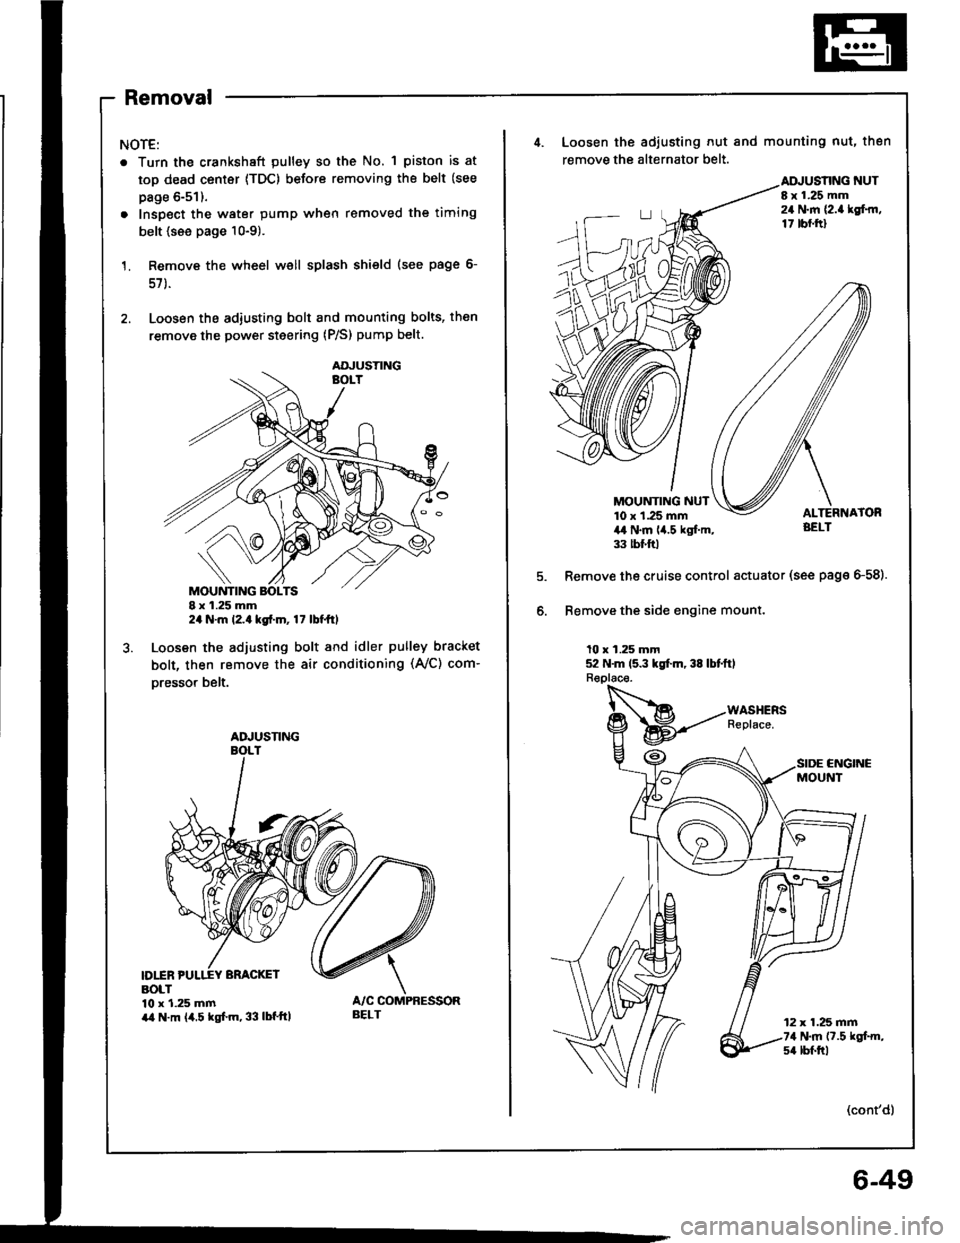 ACURA INTEGRA 1994  Service Repair Manual Removal
NOTE:
. Turn the crankshaft pulley so the No. 1 piston is at
top dead center {TDC) before removing the belt (see
page 6-51).
. Inspect the water pump when removed the timing
belt {see page 10-